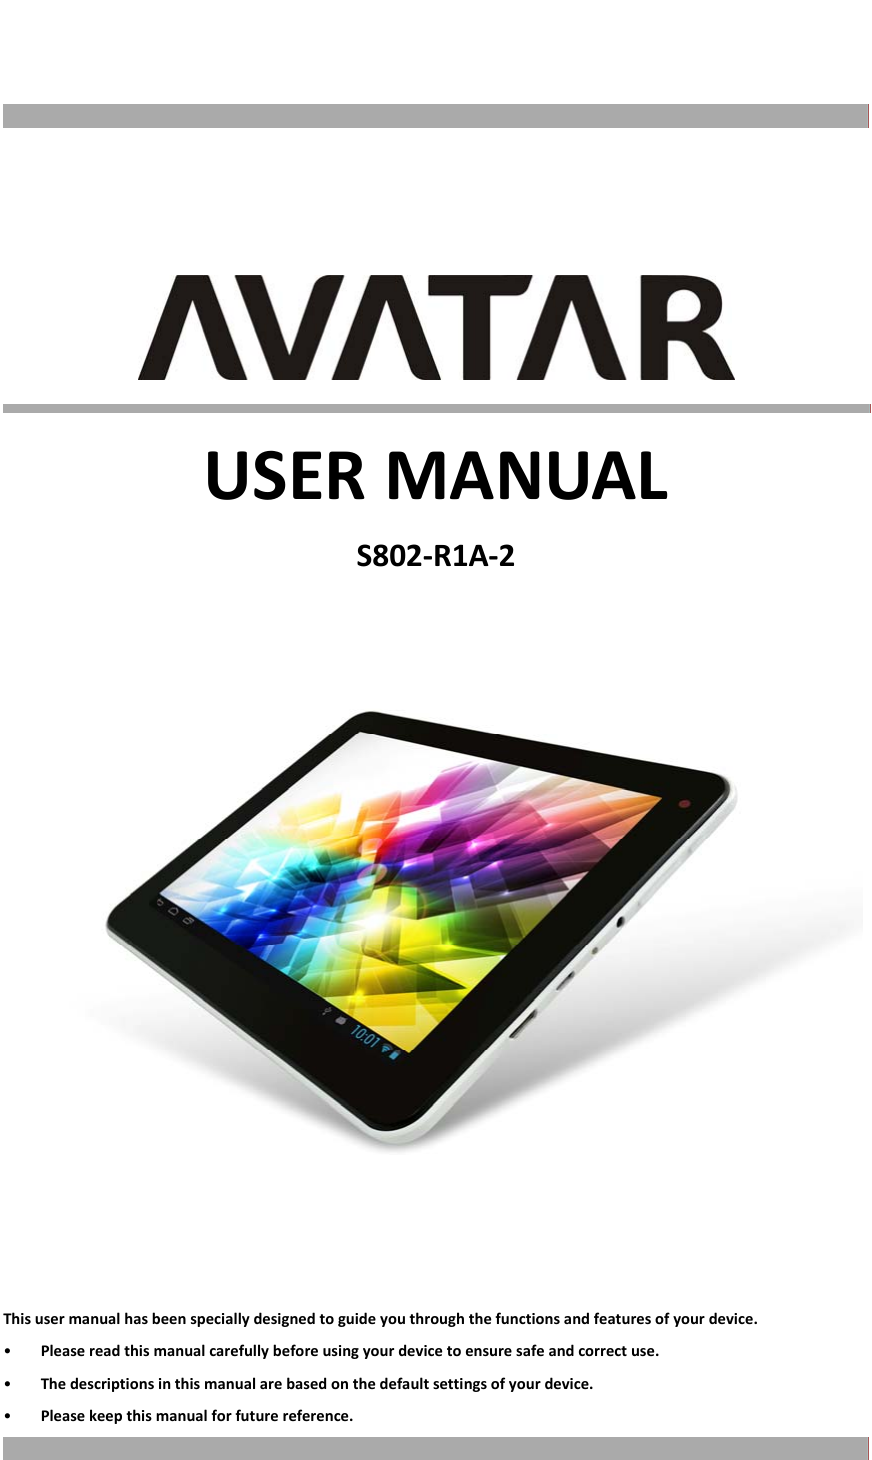 USERMANUALS802‐R1A‐2 Thisusermanualhasbeenspeciallydesignedtoguideyouthroughthefunctionsandfeaturesofyourdevice.• Pleasereadthismanualcarefullybeforeusingyourdevicetoensuresafeandcorrectuse.• Thedescriptionsinthismanualarebasedonthedefaultsettingsofyourdevice.• Pleasekeepthismanualforfuturereference.